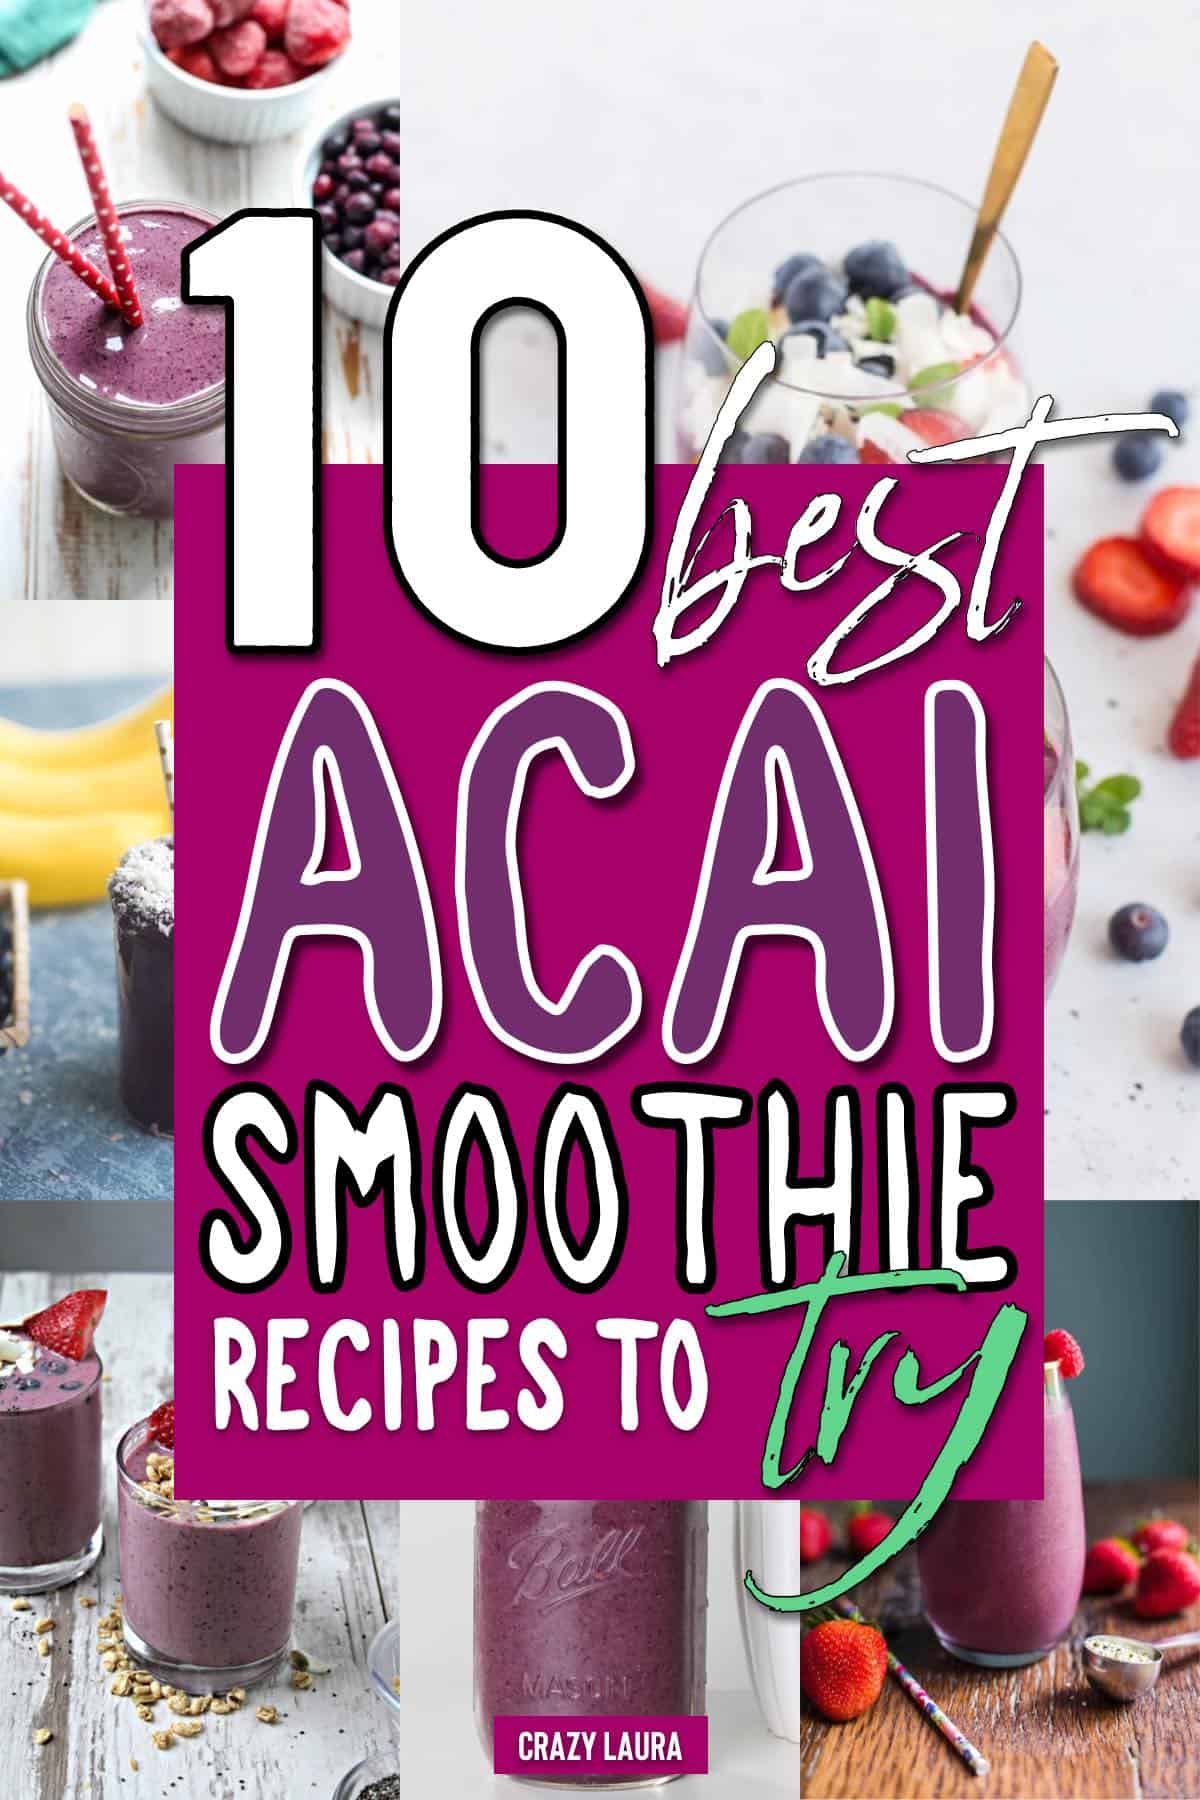 blender recipes with acai